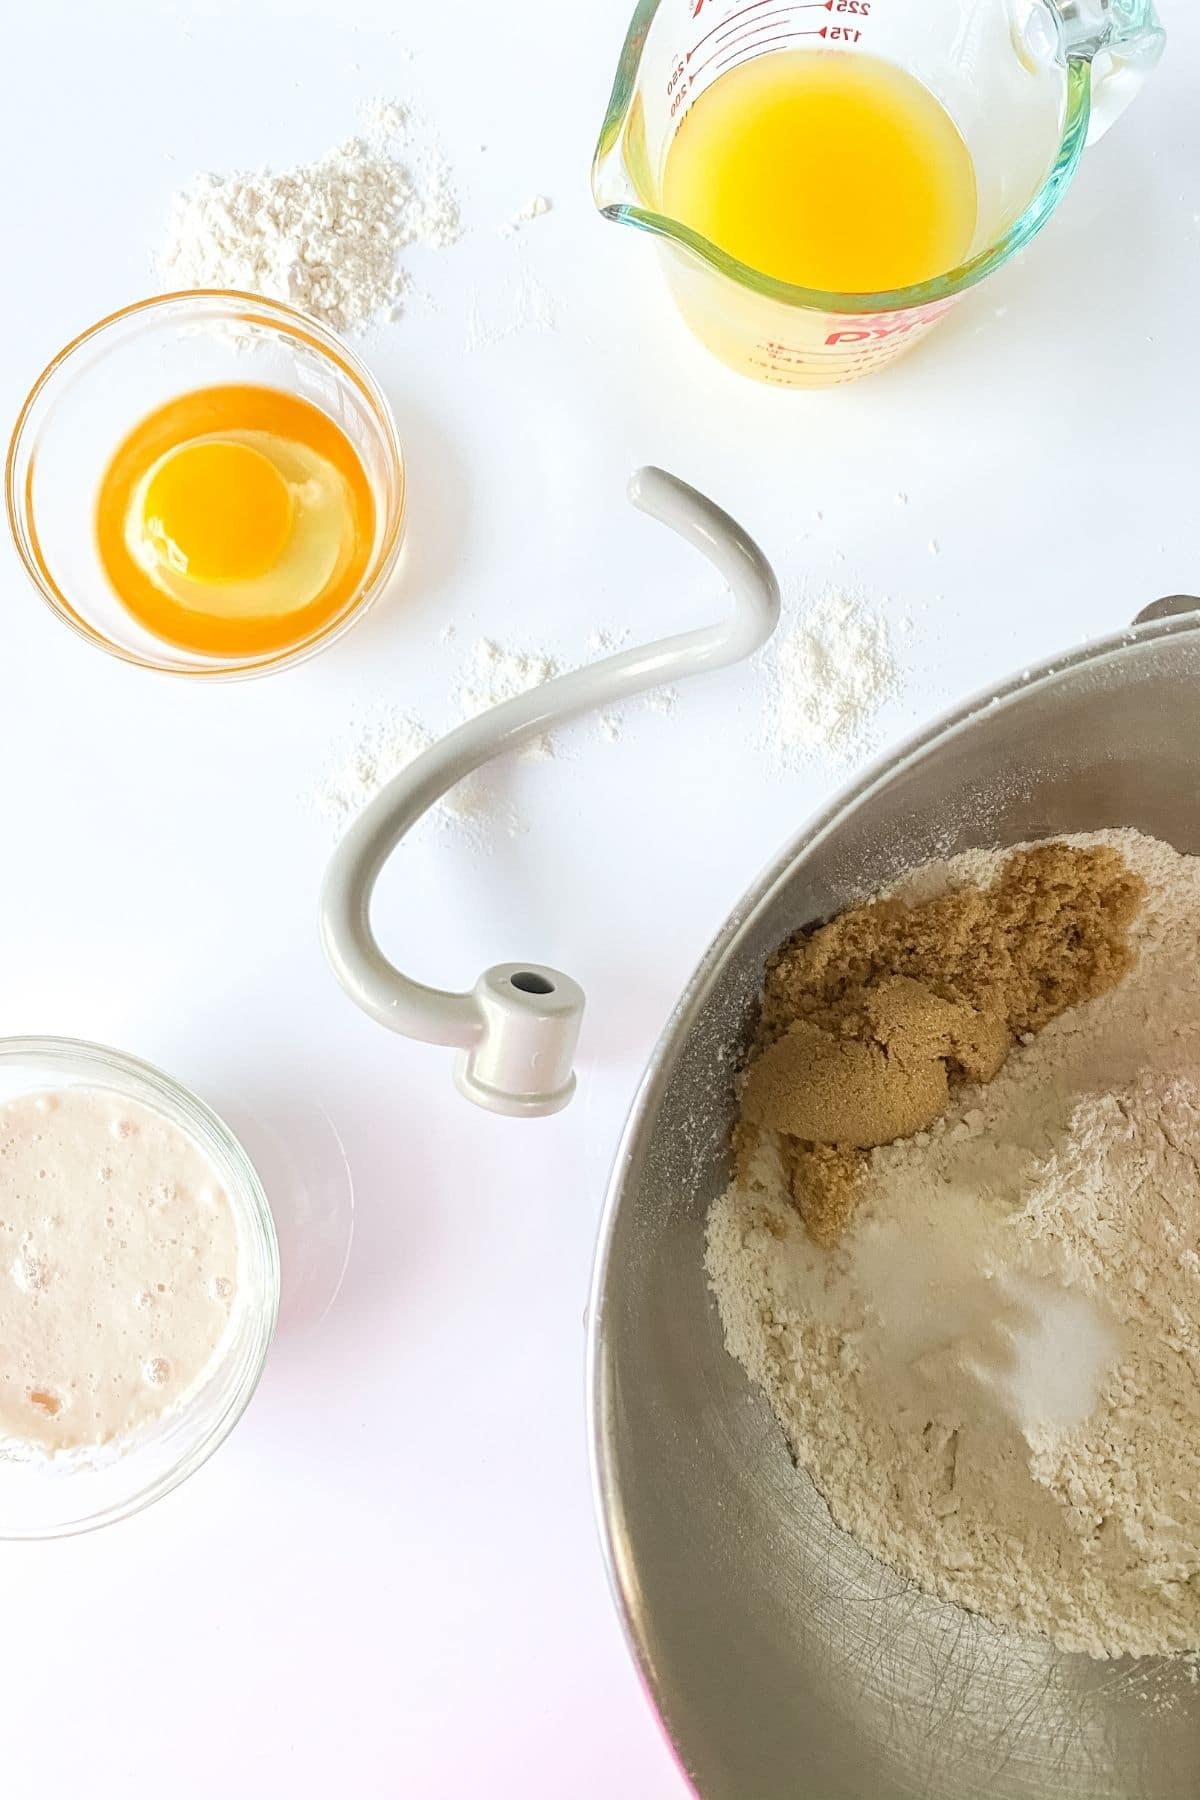 Mixing yeast in bowl